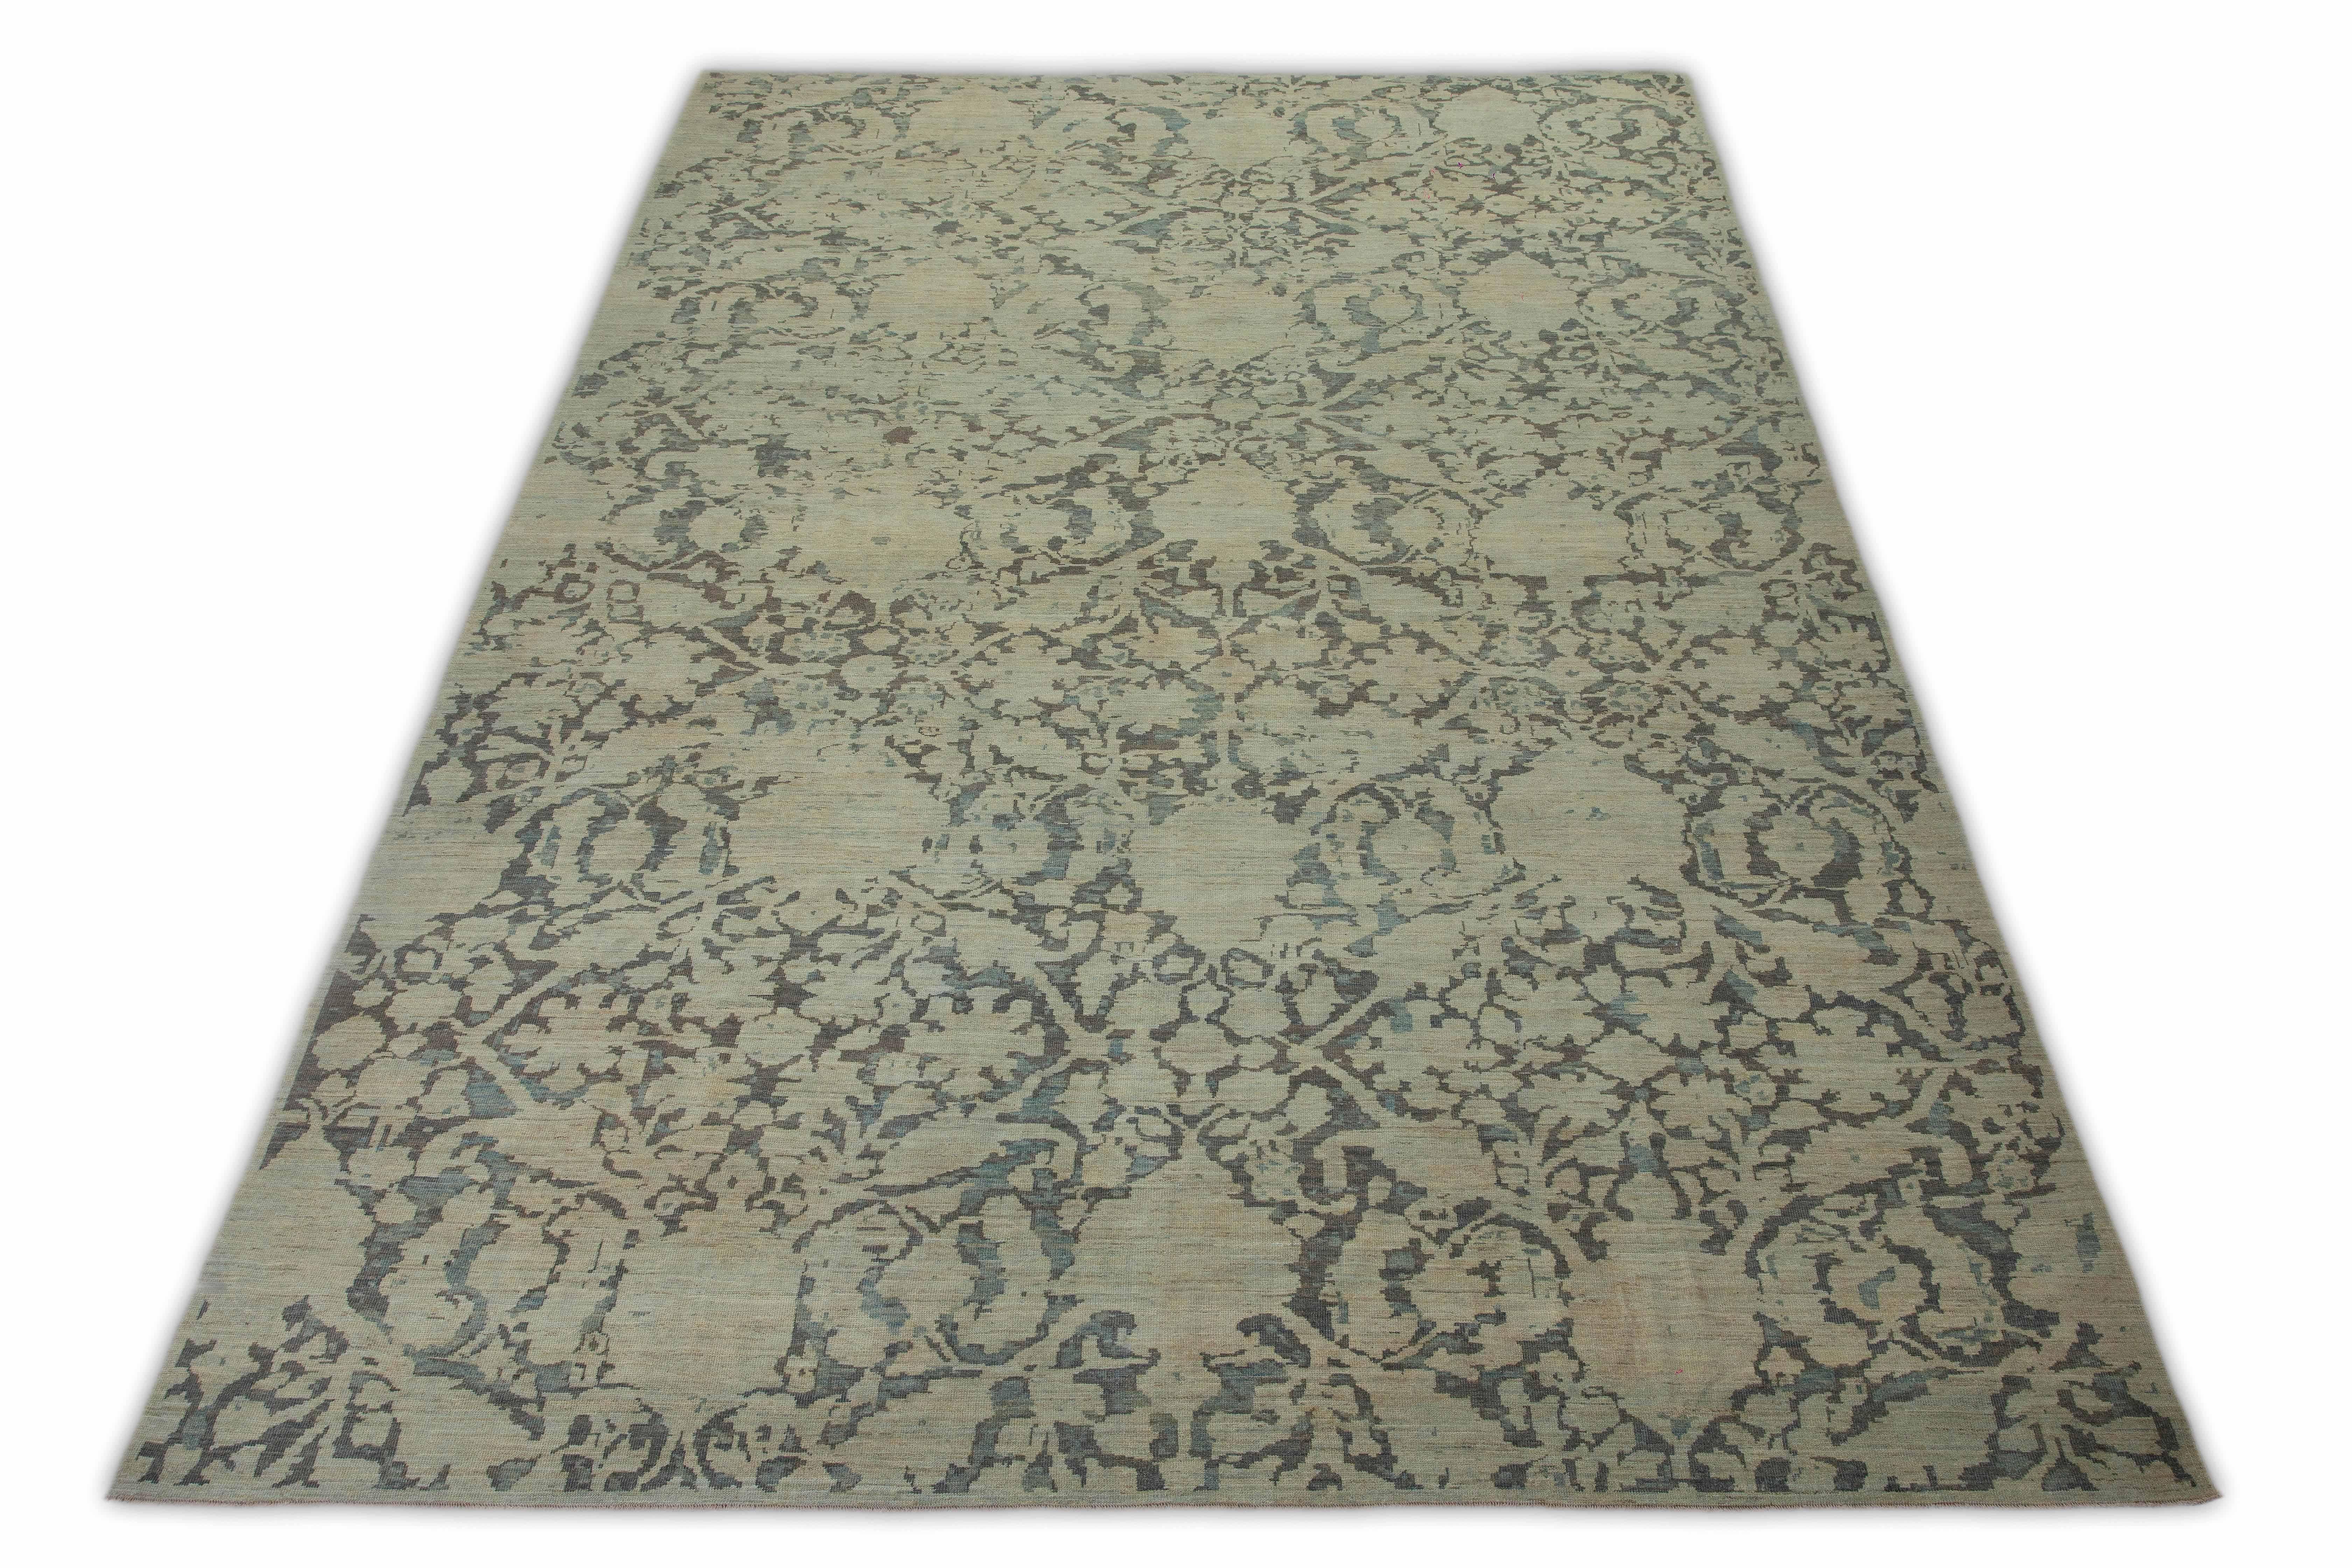 Handmade Turkish area rug from high quality sheep’s wool and colored with eco-friendly vegetable dyes that are proven safe for humans and pets alike. It’s a Classic Sultanabad design showcasing a regal dark hue of gray field with prominent Herati